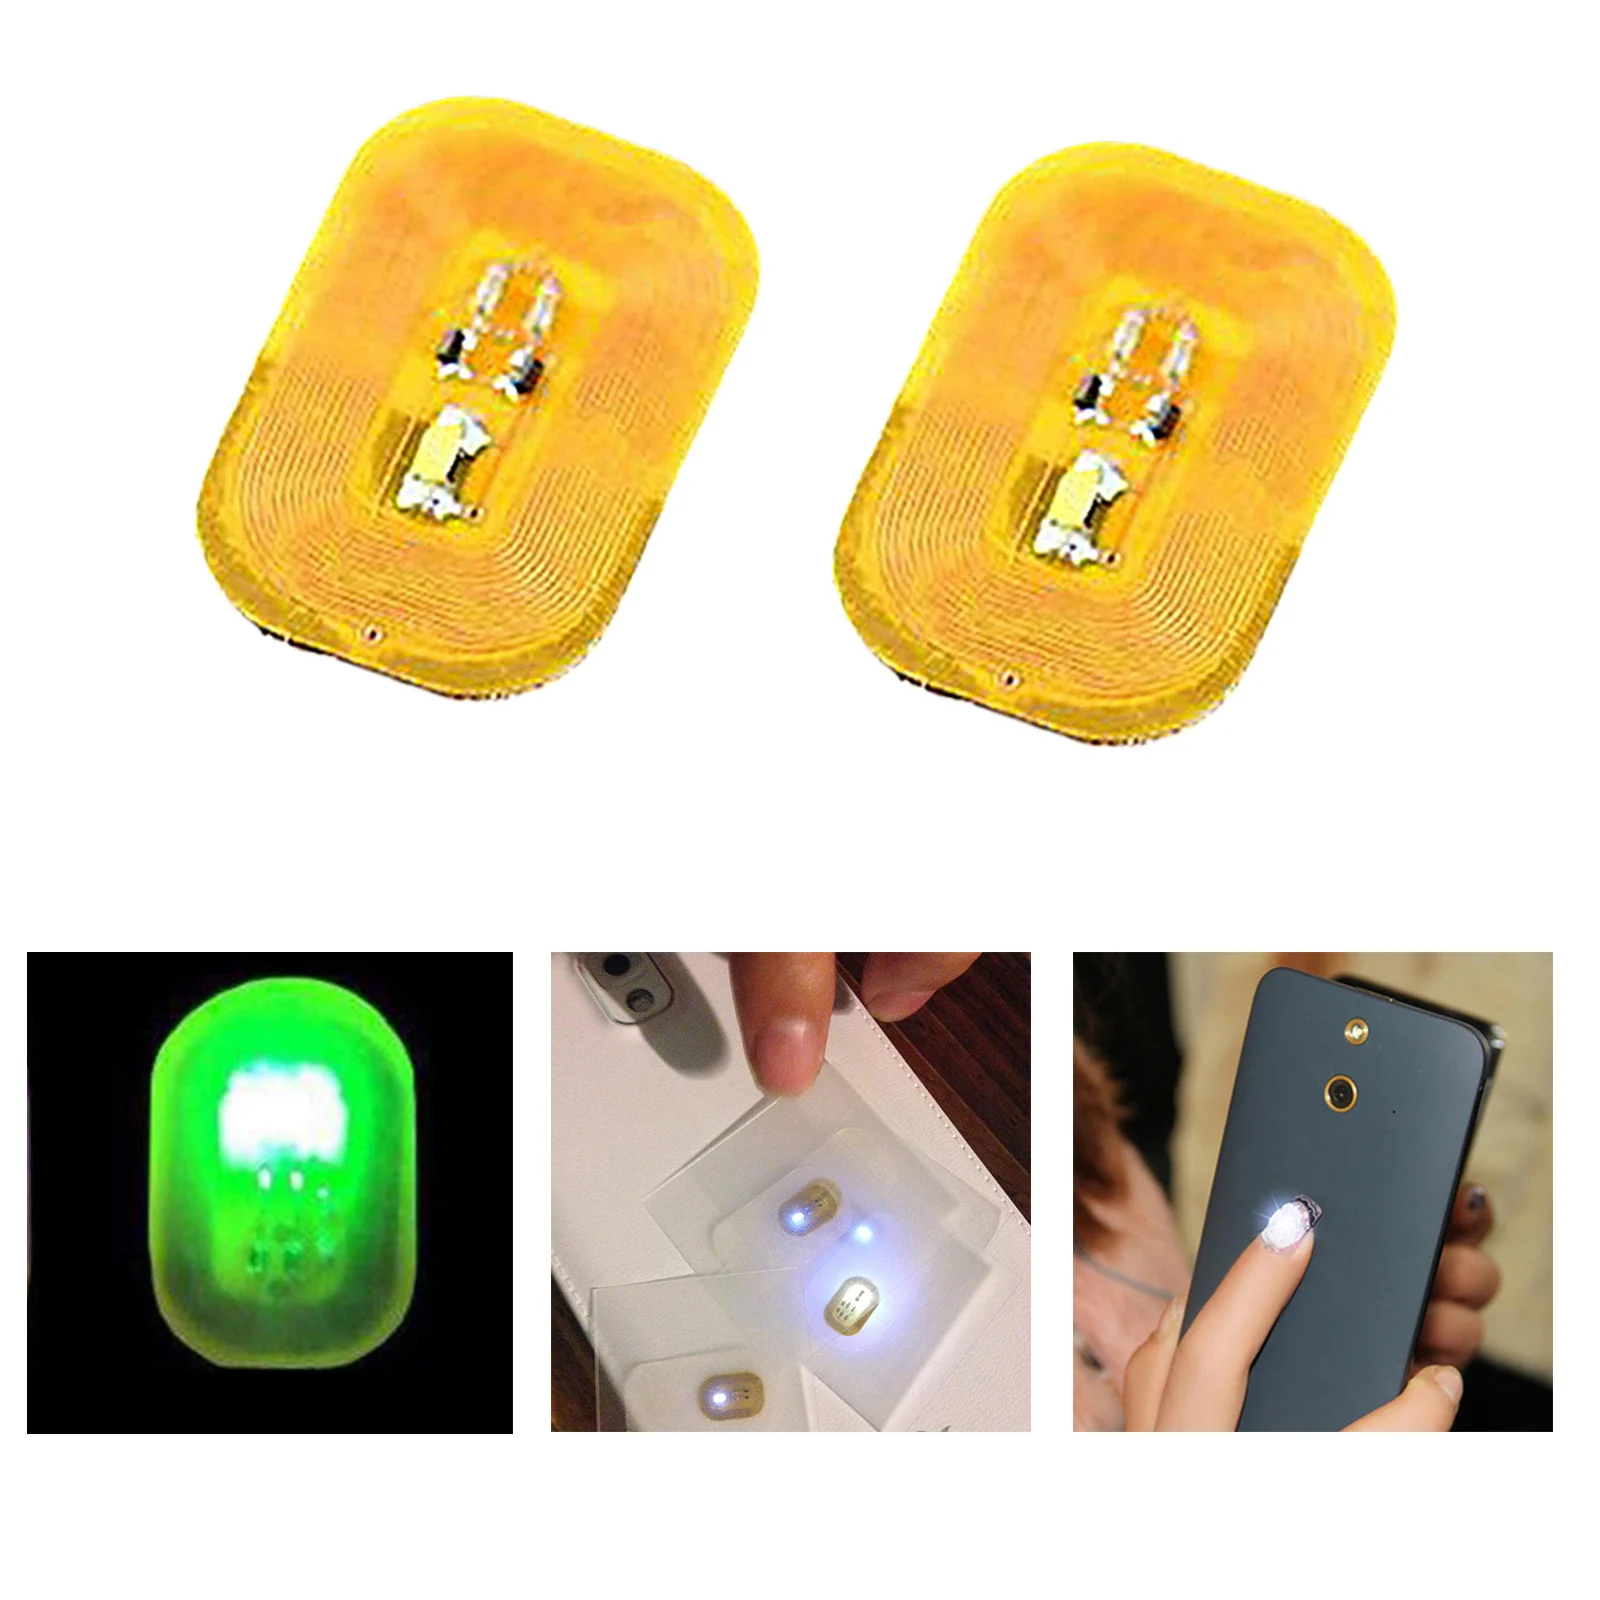 2 Pieces Luck NFC Enabled Chip Nail Art Sticker LED Lighting Accessories